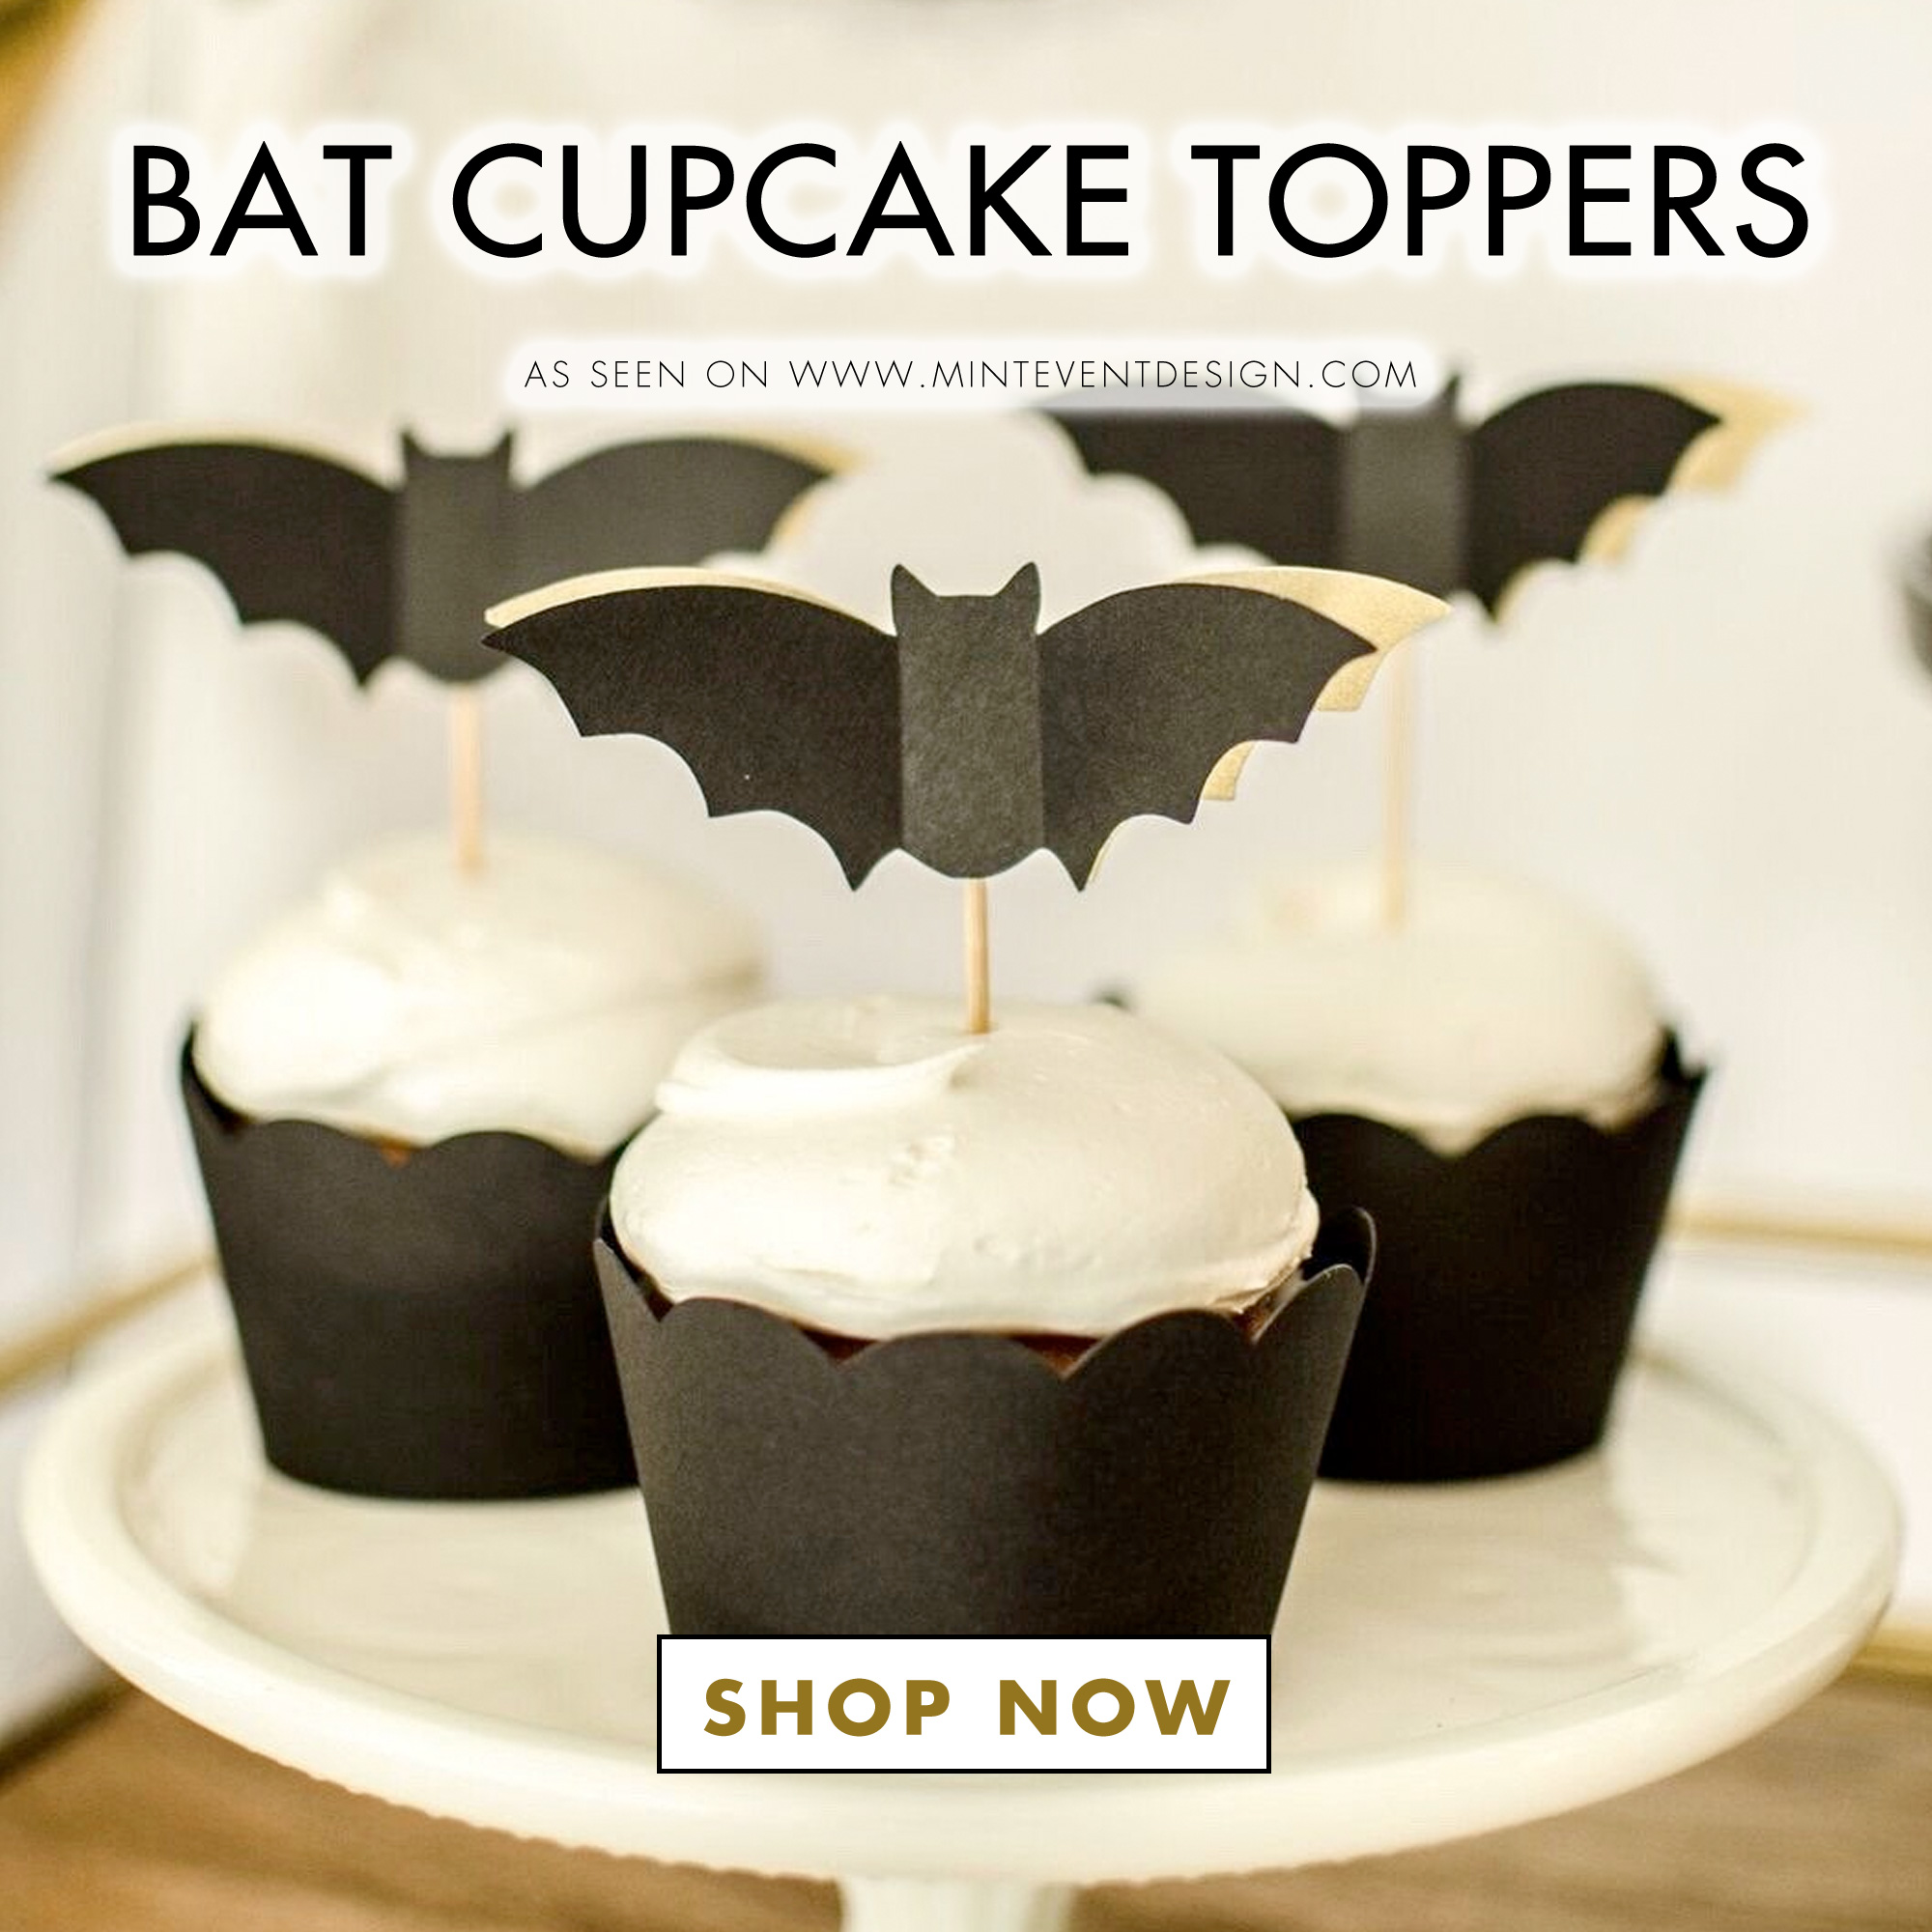  Shop Bat Cupcake Toppers for your Halloween Parties. They’re perfect for your Halloween Bar Cart Styling. See all the Halloween Set Up Details on Mint Event Design. www.minteventdesign.com #halloweendecor #halloweenparty #halloweenpartyideas #barcar